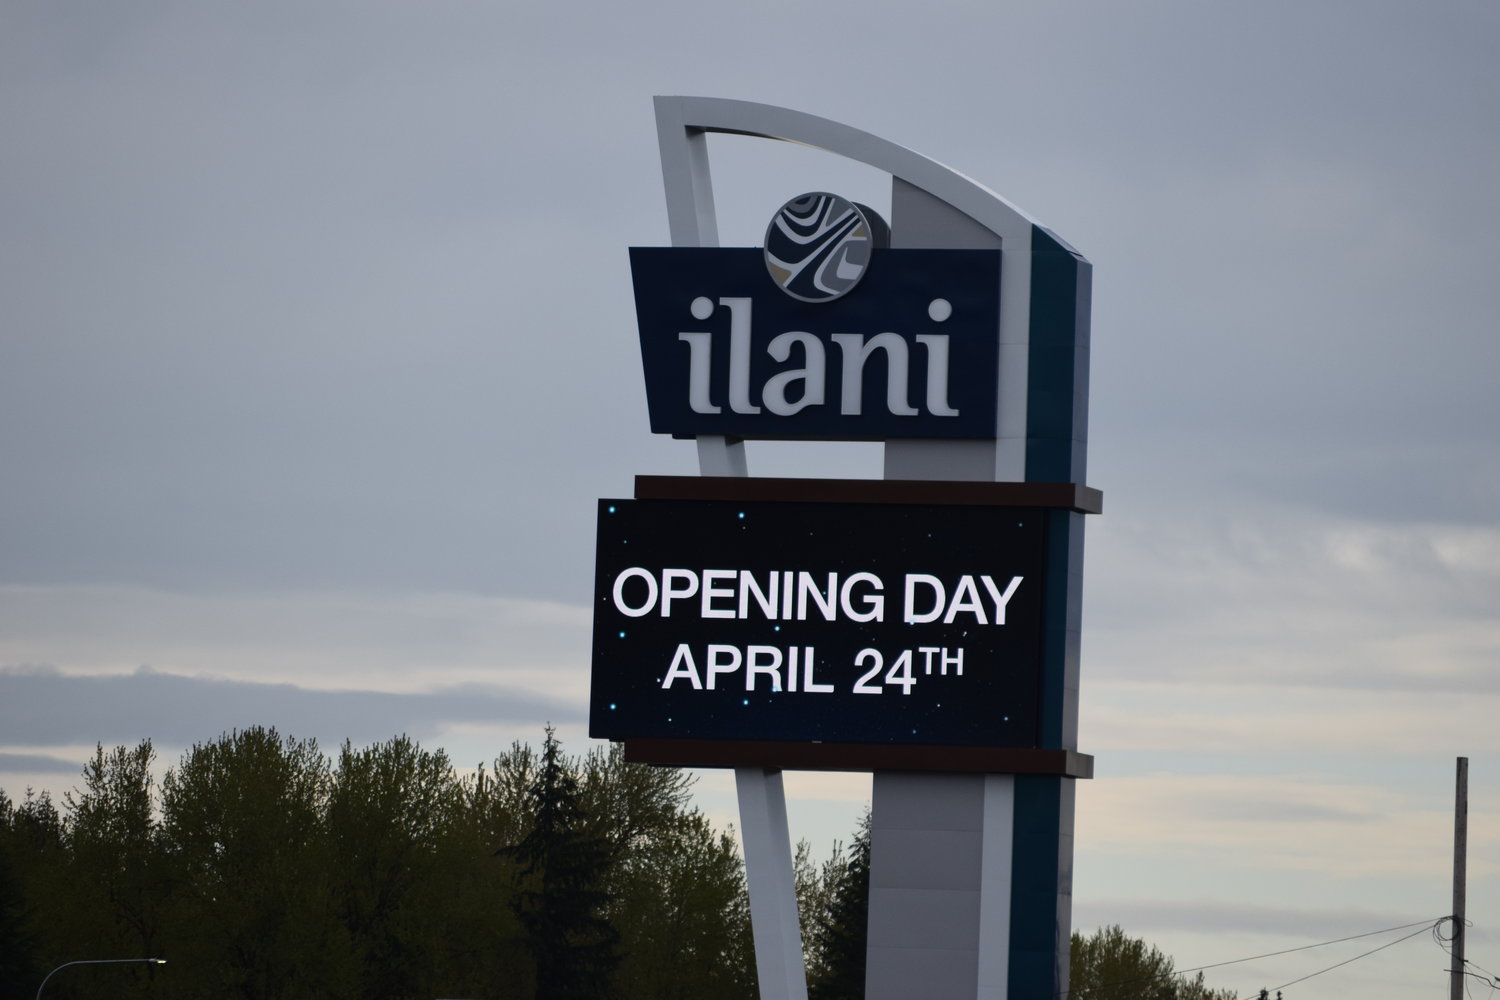 As pictured on ilani’s I-5 sign, the brand new casino is set to open Monday, April 24.